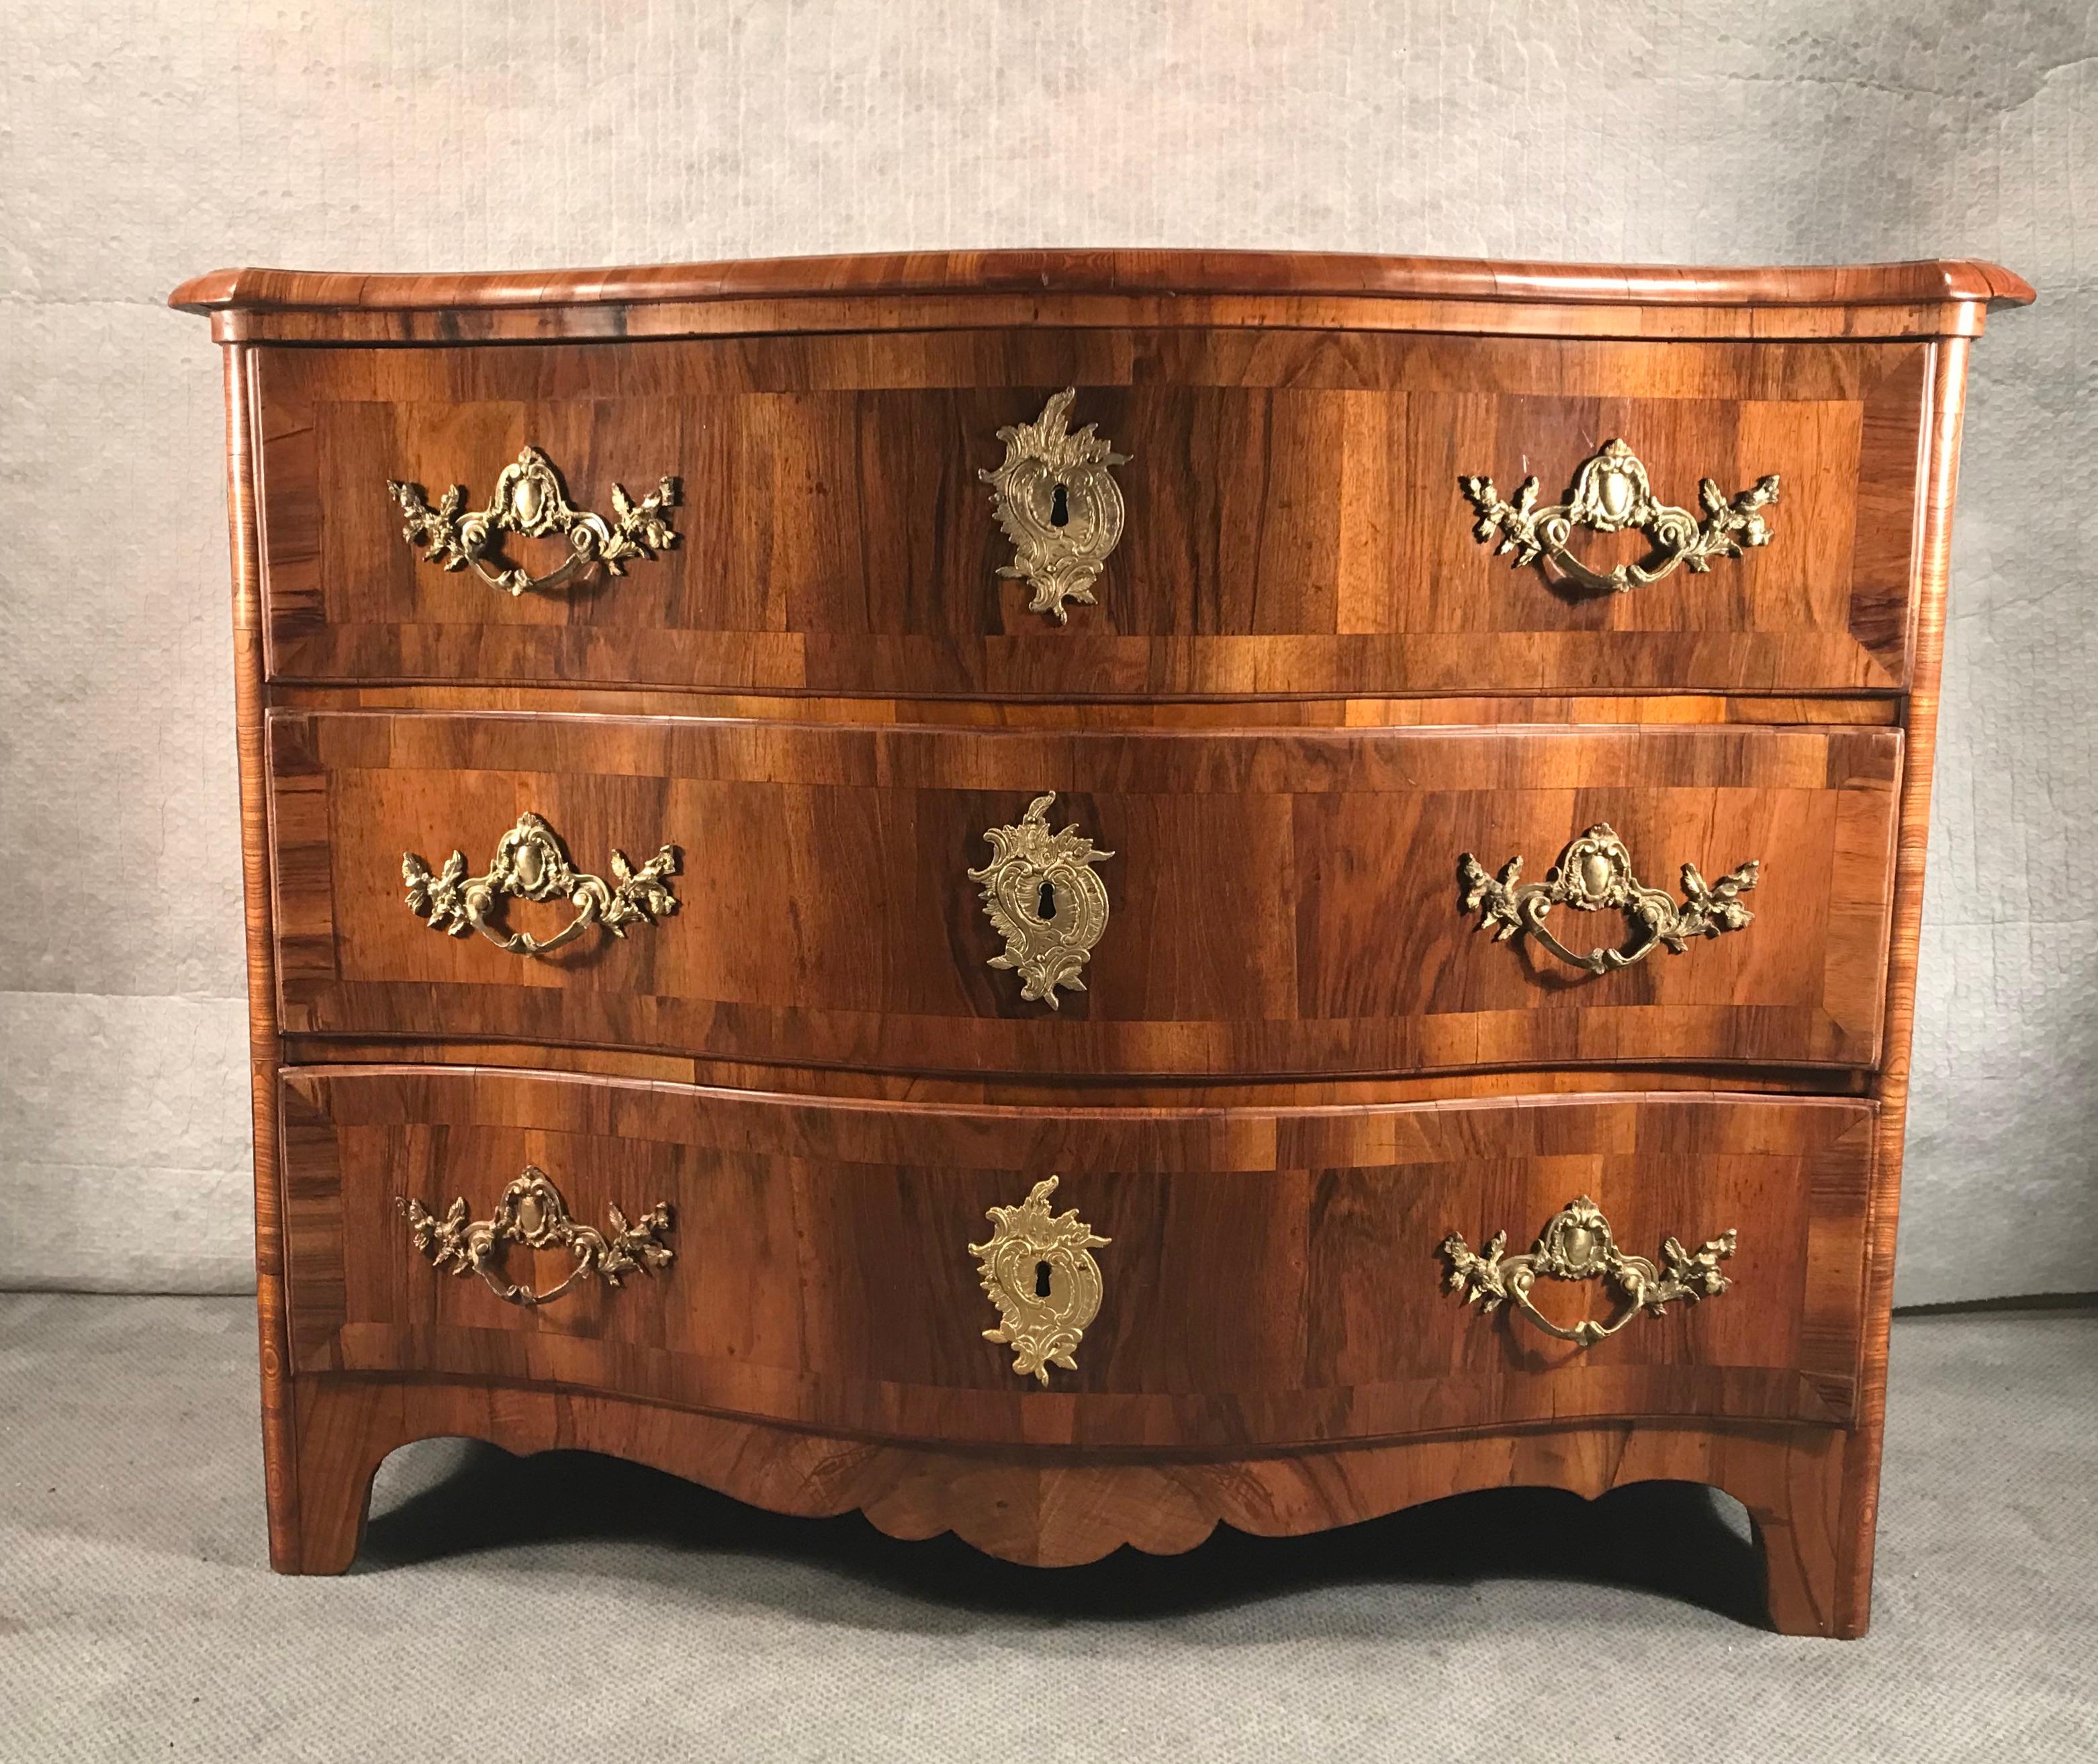 This beautiful German Baroque dresser dates back to circa 1750. It was probably made in the region of the city of Dresden.
Different walnut veneer grains embellish this original commode. The three drawers are decorated with the original bronze